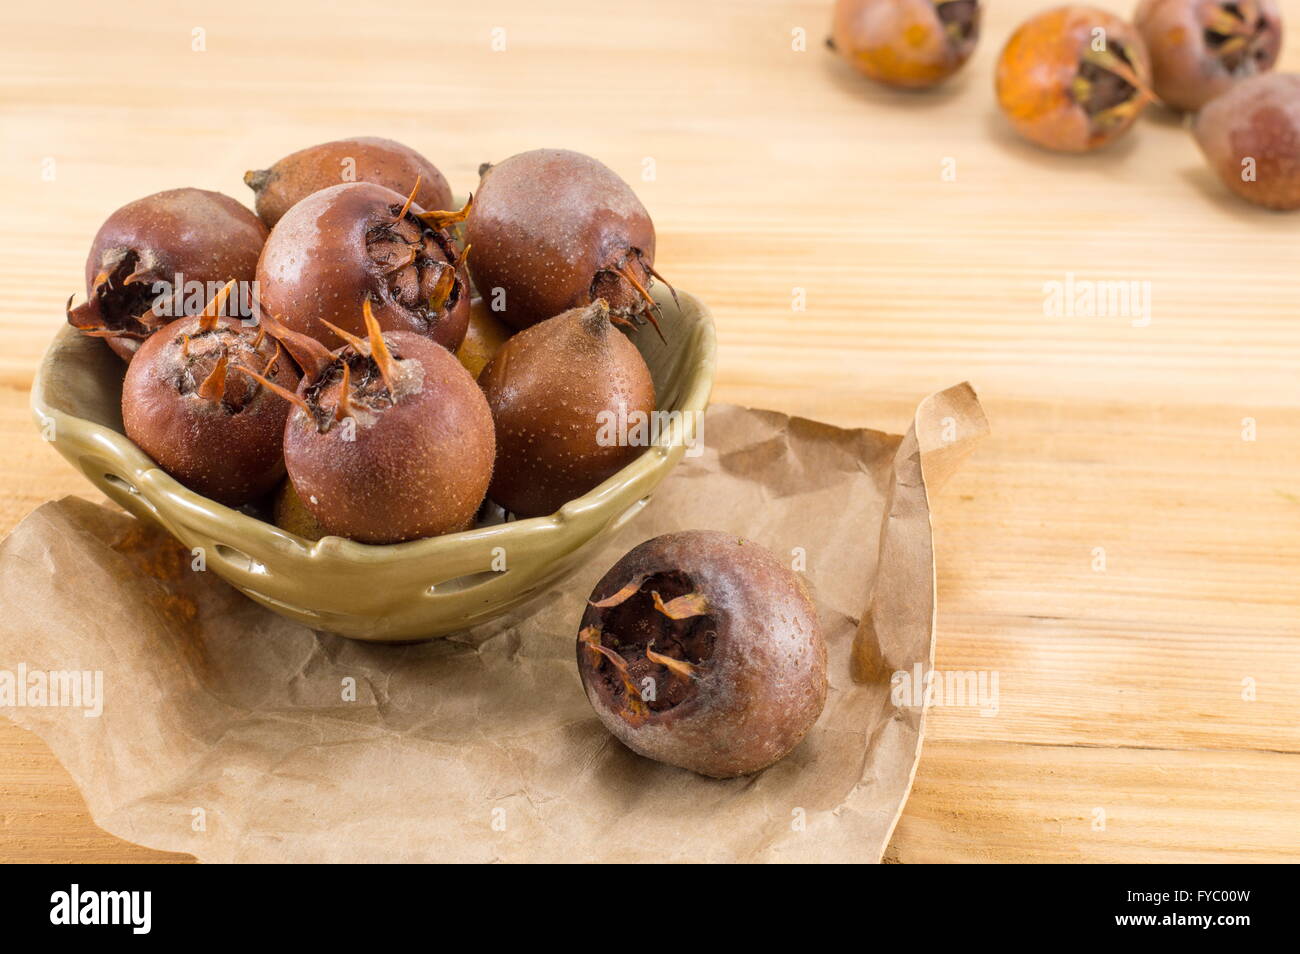 Healthy ripe Medlars on an old wooden table Stock Photo